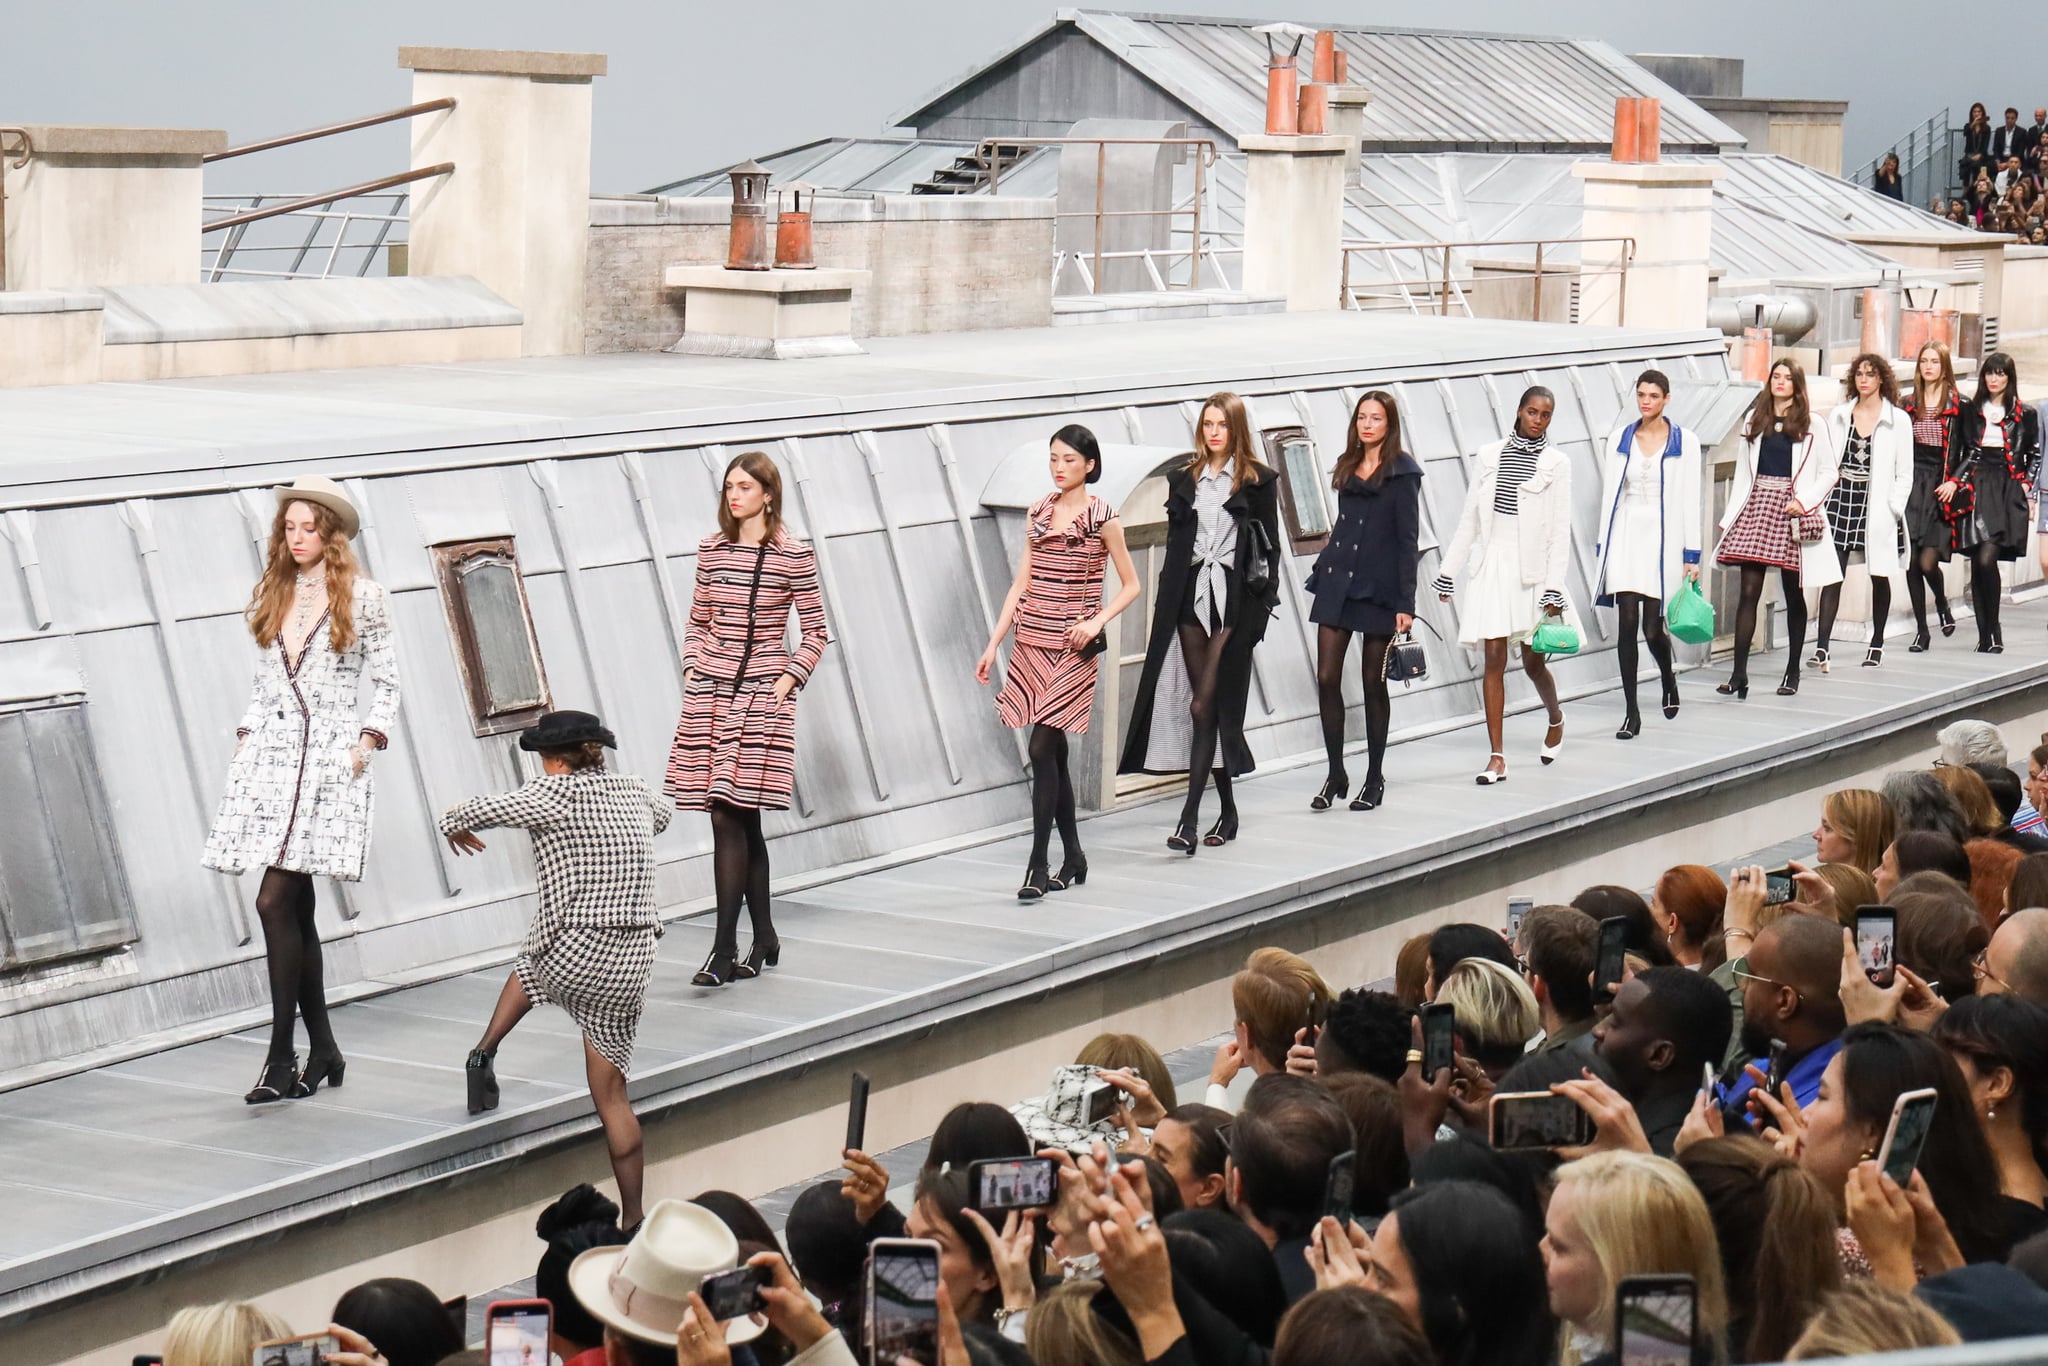 PARIS, FRANCE - OCTOBER 01: A spectator from the audience climbs the runway to walk with the models during the finale of the Chanel Womenswear Spring/Summer 2020 show as part of Paris Fashion Week on October 1, 2019 in Paris, France. (Photo by Victor Boyko/Getty Images)